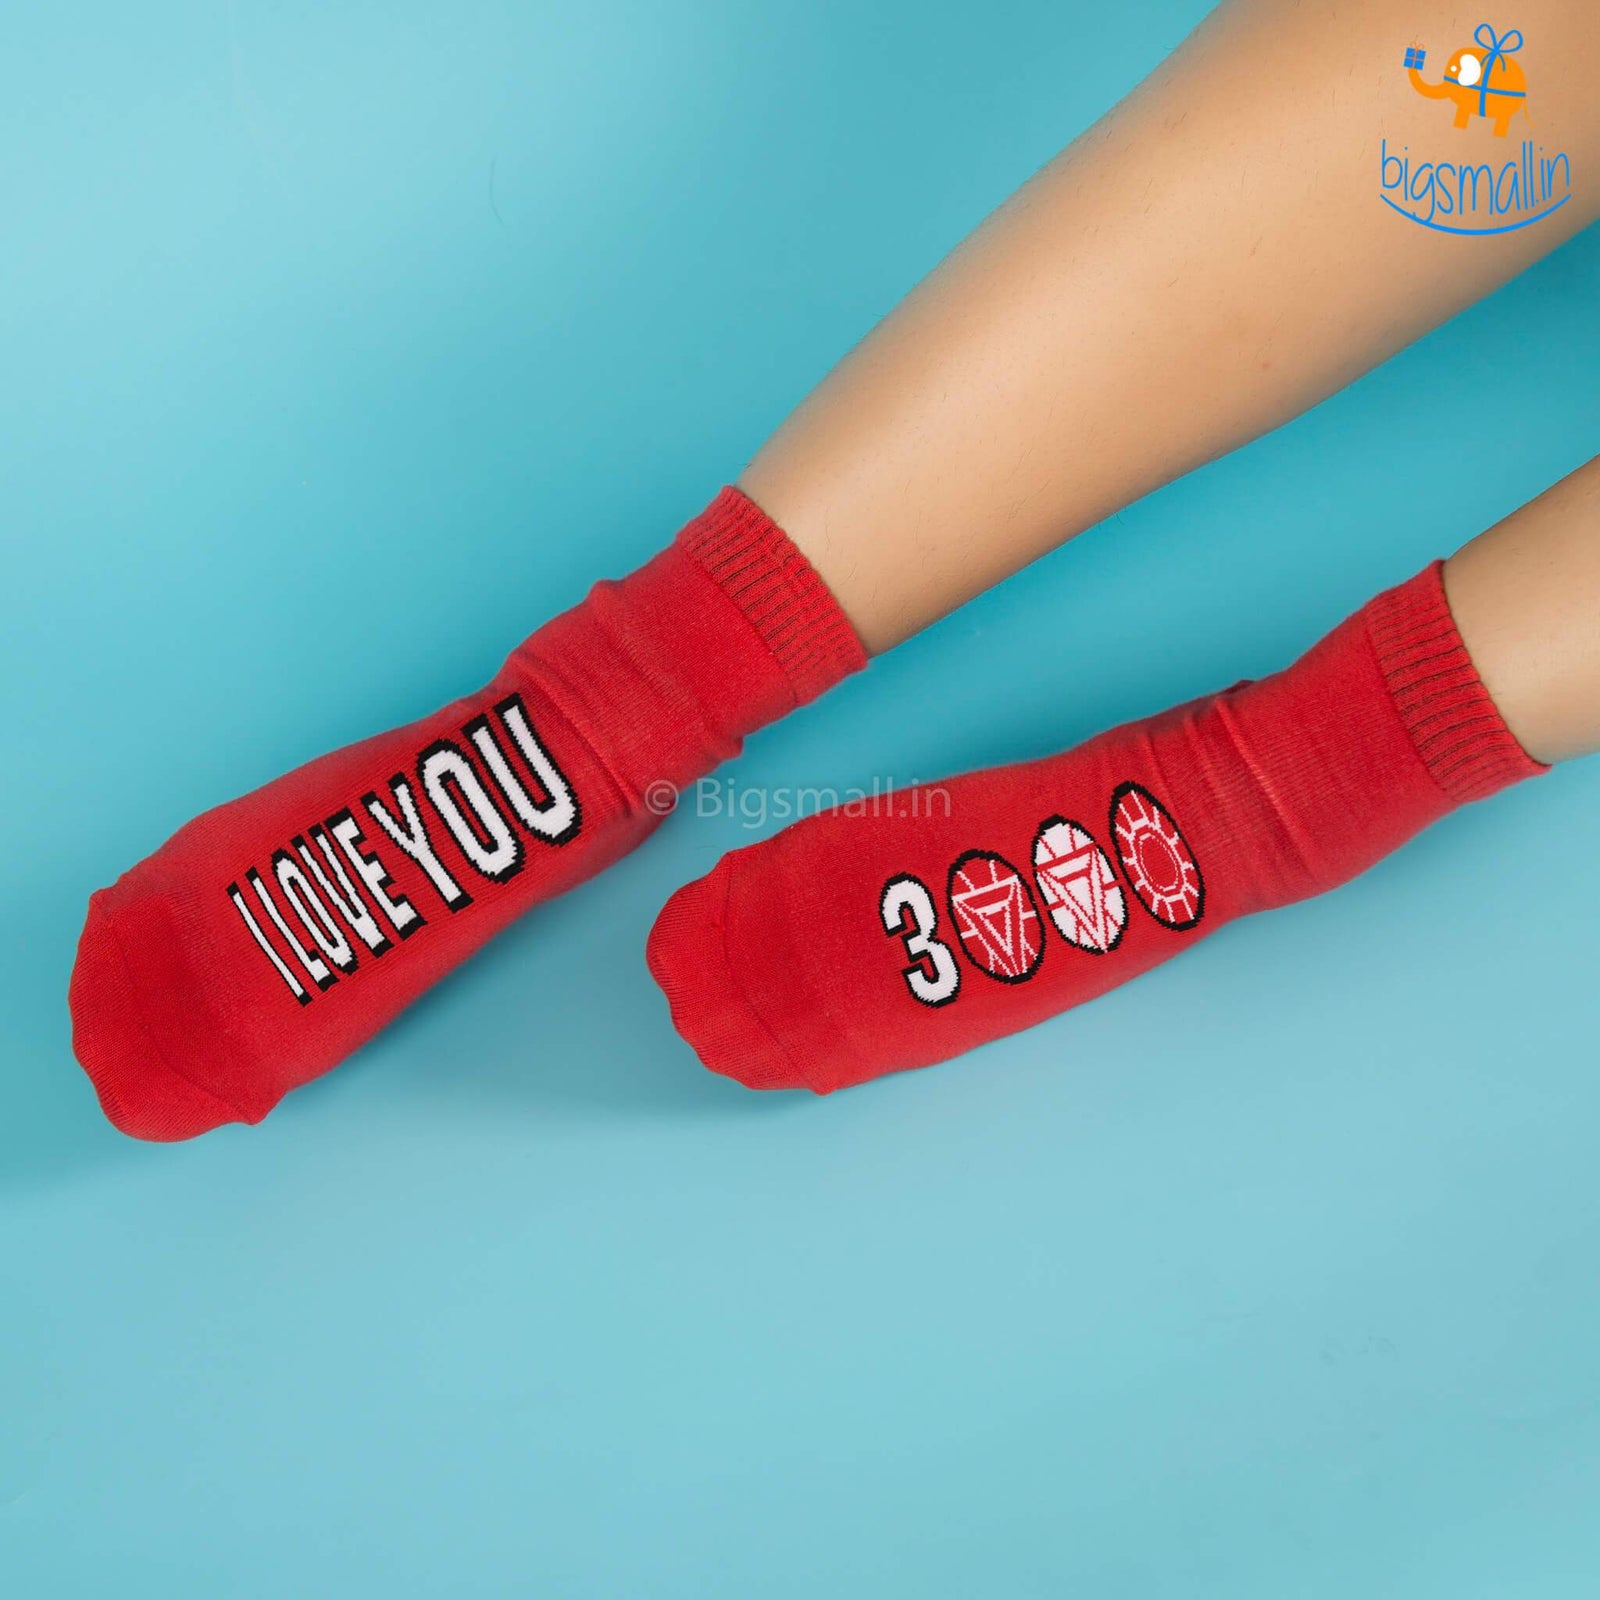 Product Of The Week - I Love You 3000 Socks - Iron Man